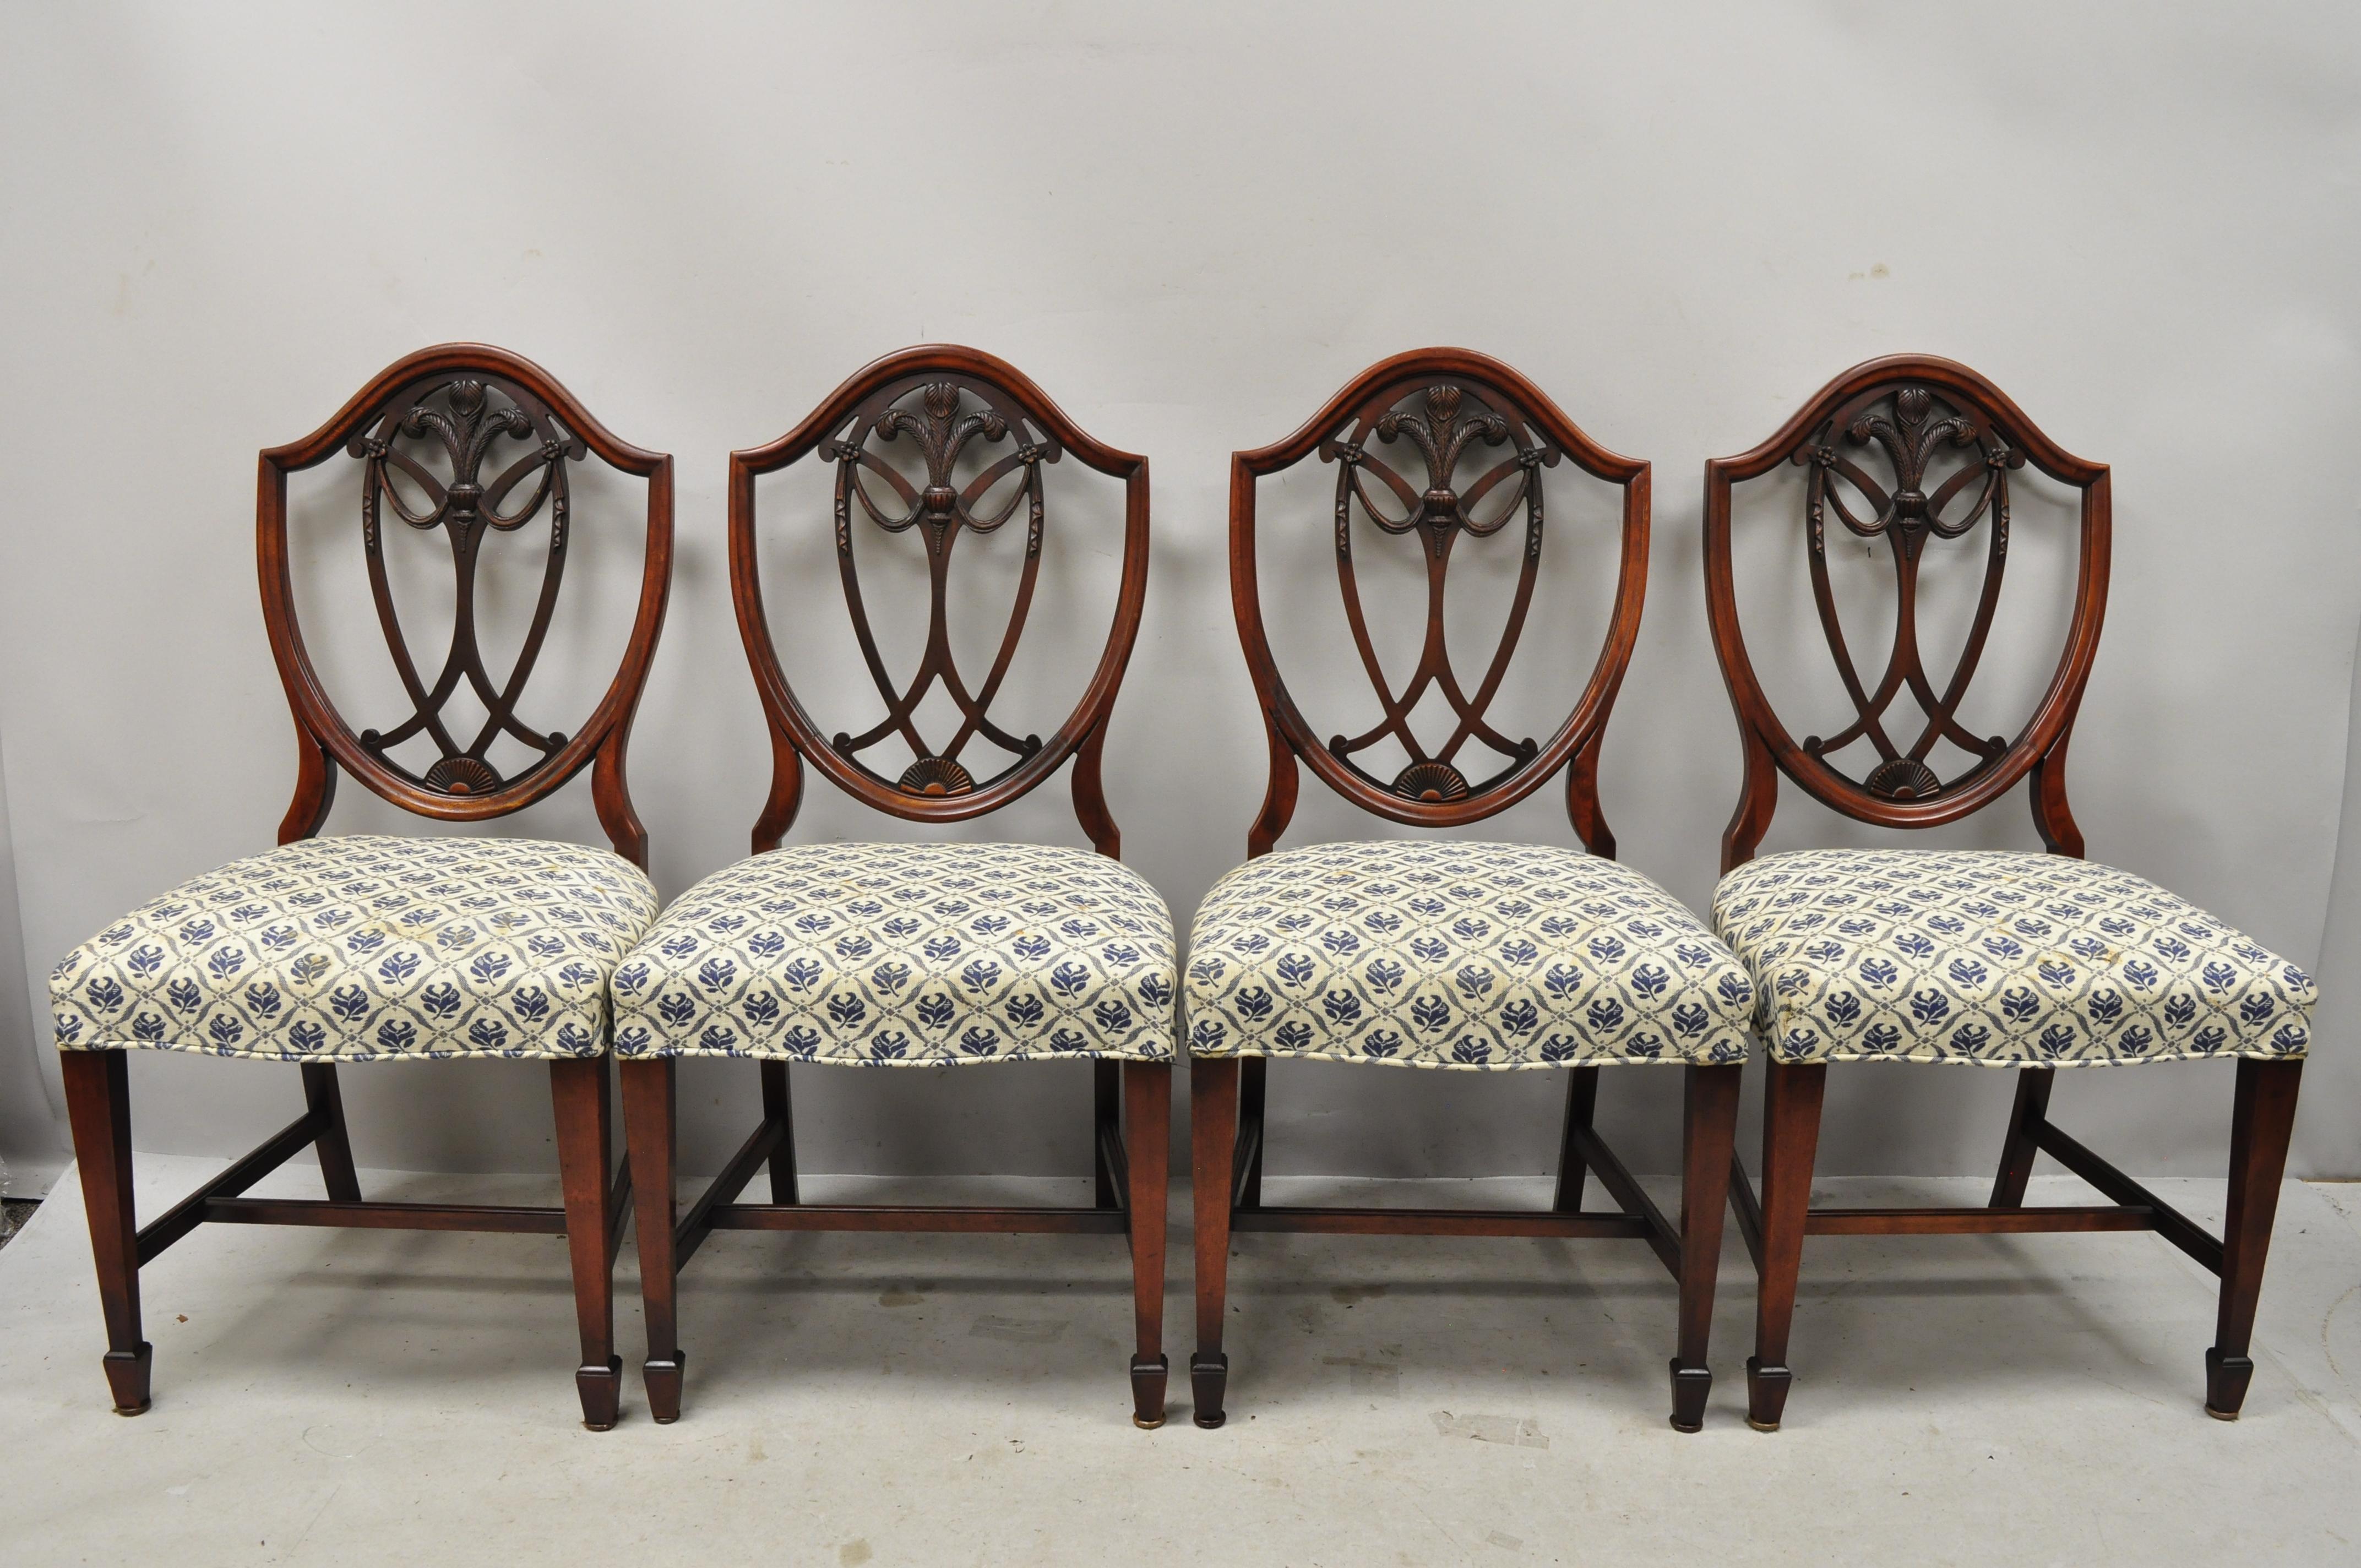 Antique Hepplewhite style mahogany prince of wales plume drape shield back dining chairs - set of 6. Set includes (4) side chairs, (2) armchairs, prince of wales and drape carved shield backs, solid wood construction, beautiful wood grain, nicely